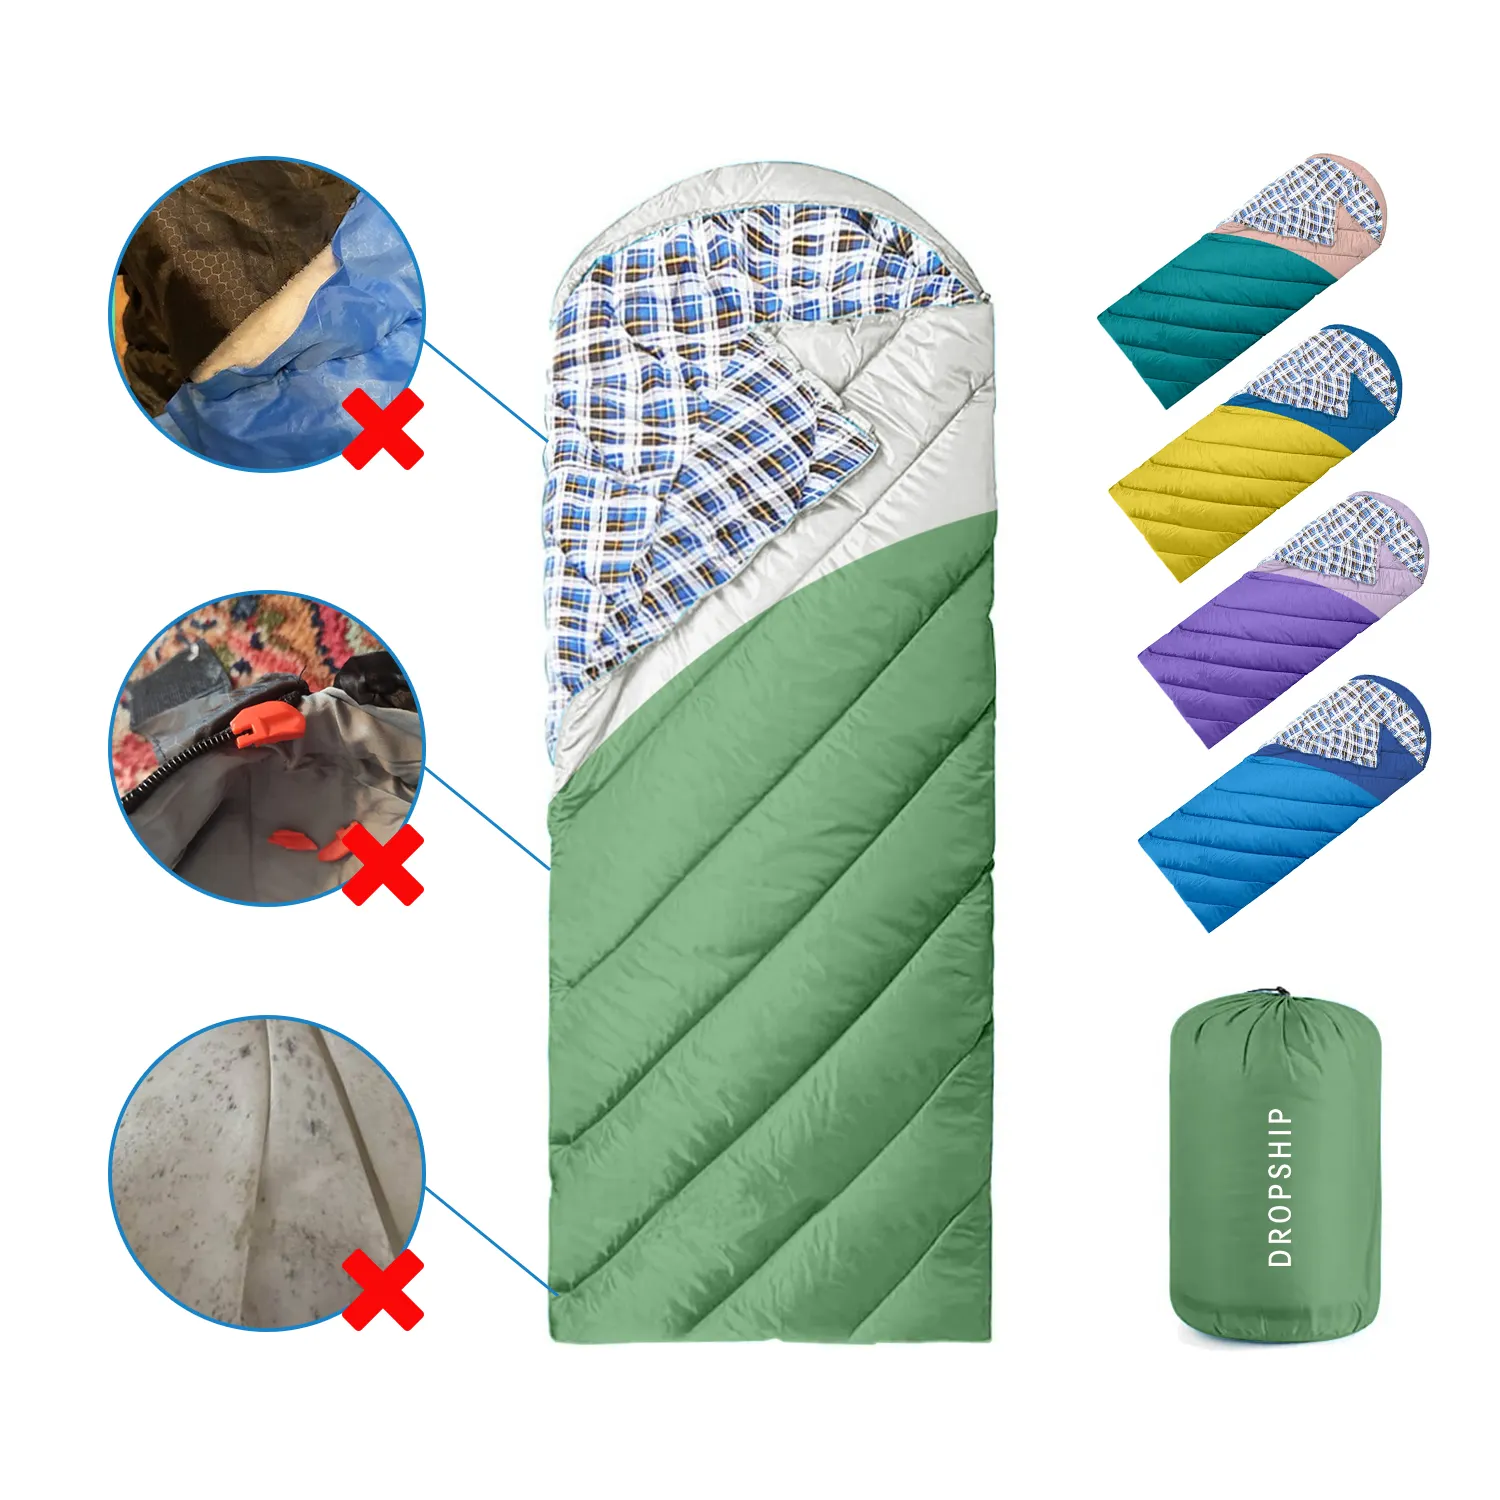 Anti-mildew Cool Weather Lightweight Waterproof Adults Sleeping Bag Camping Mutil Color Traveling Outdoors Ripstop Hiking